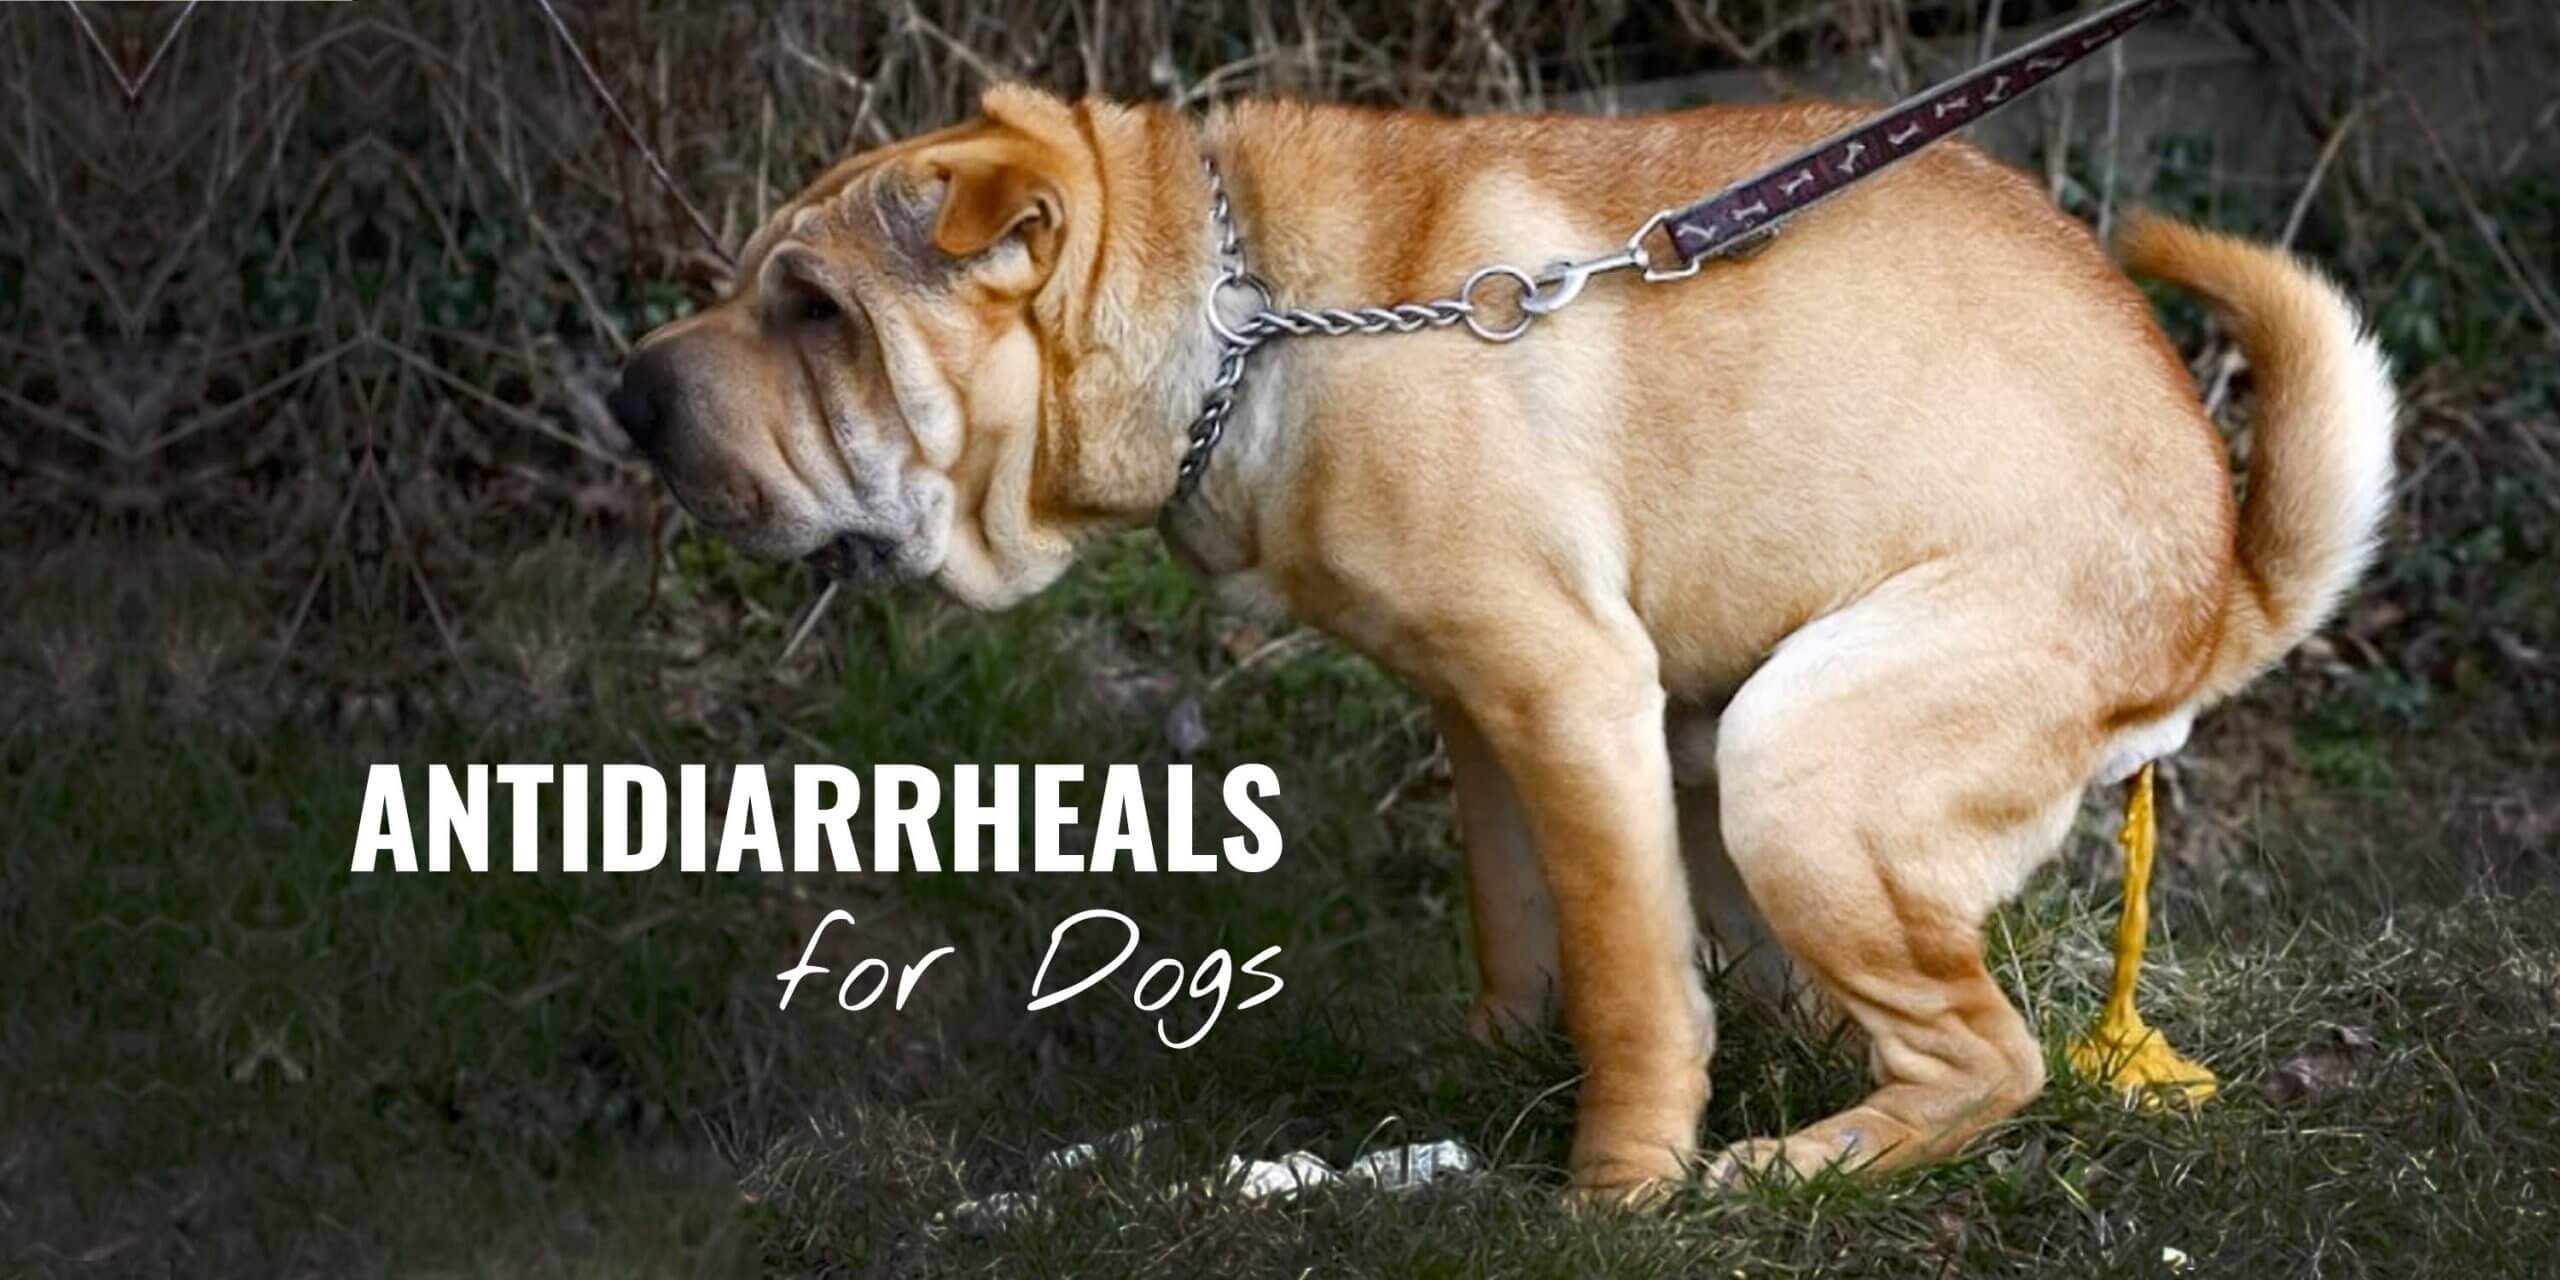 antidiarrheals for dogs scaled